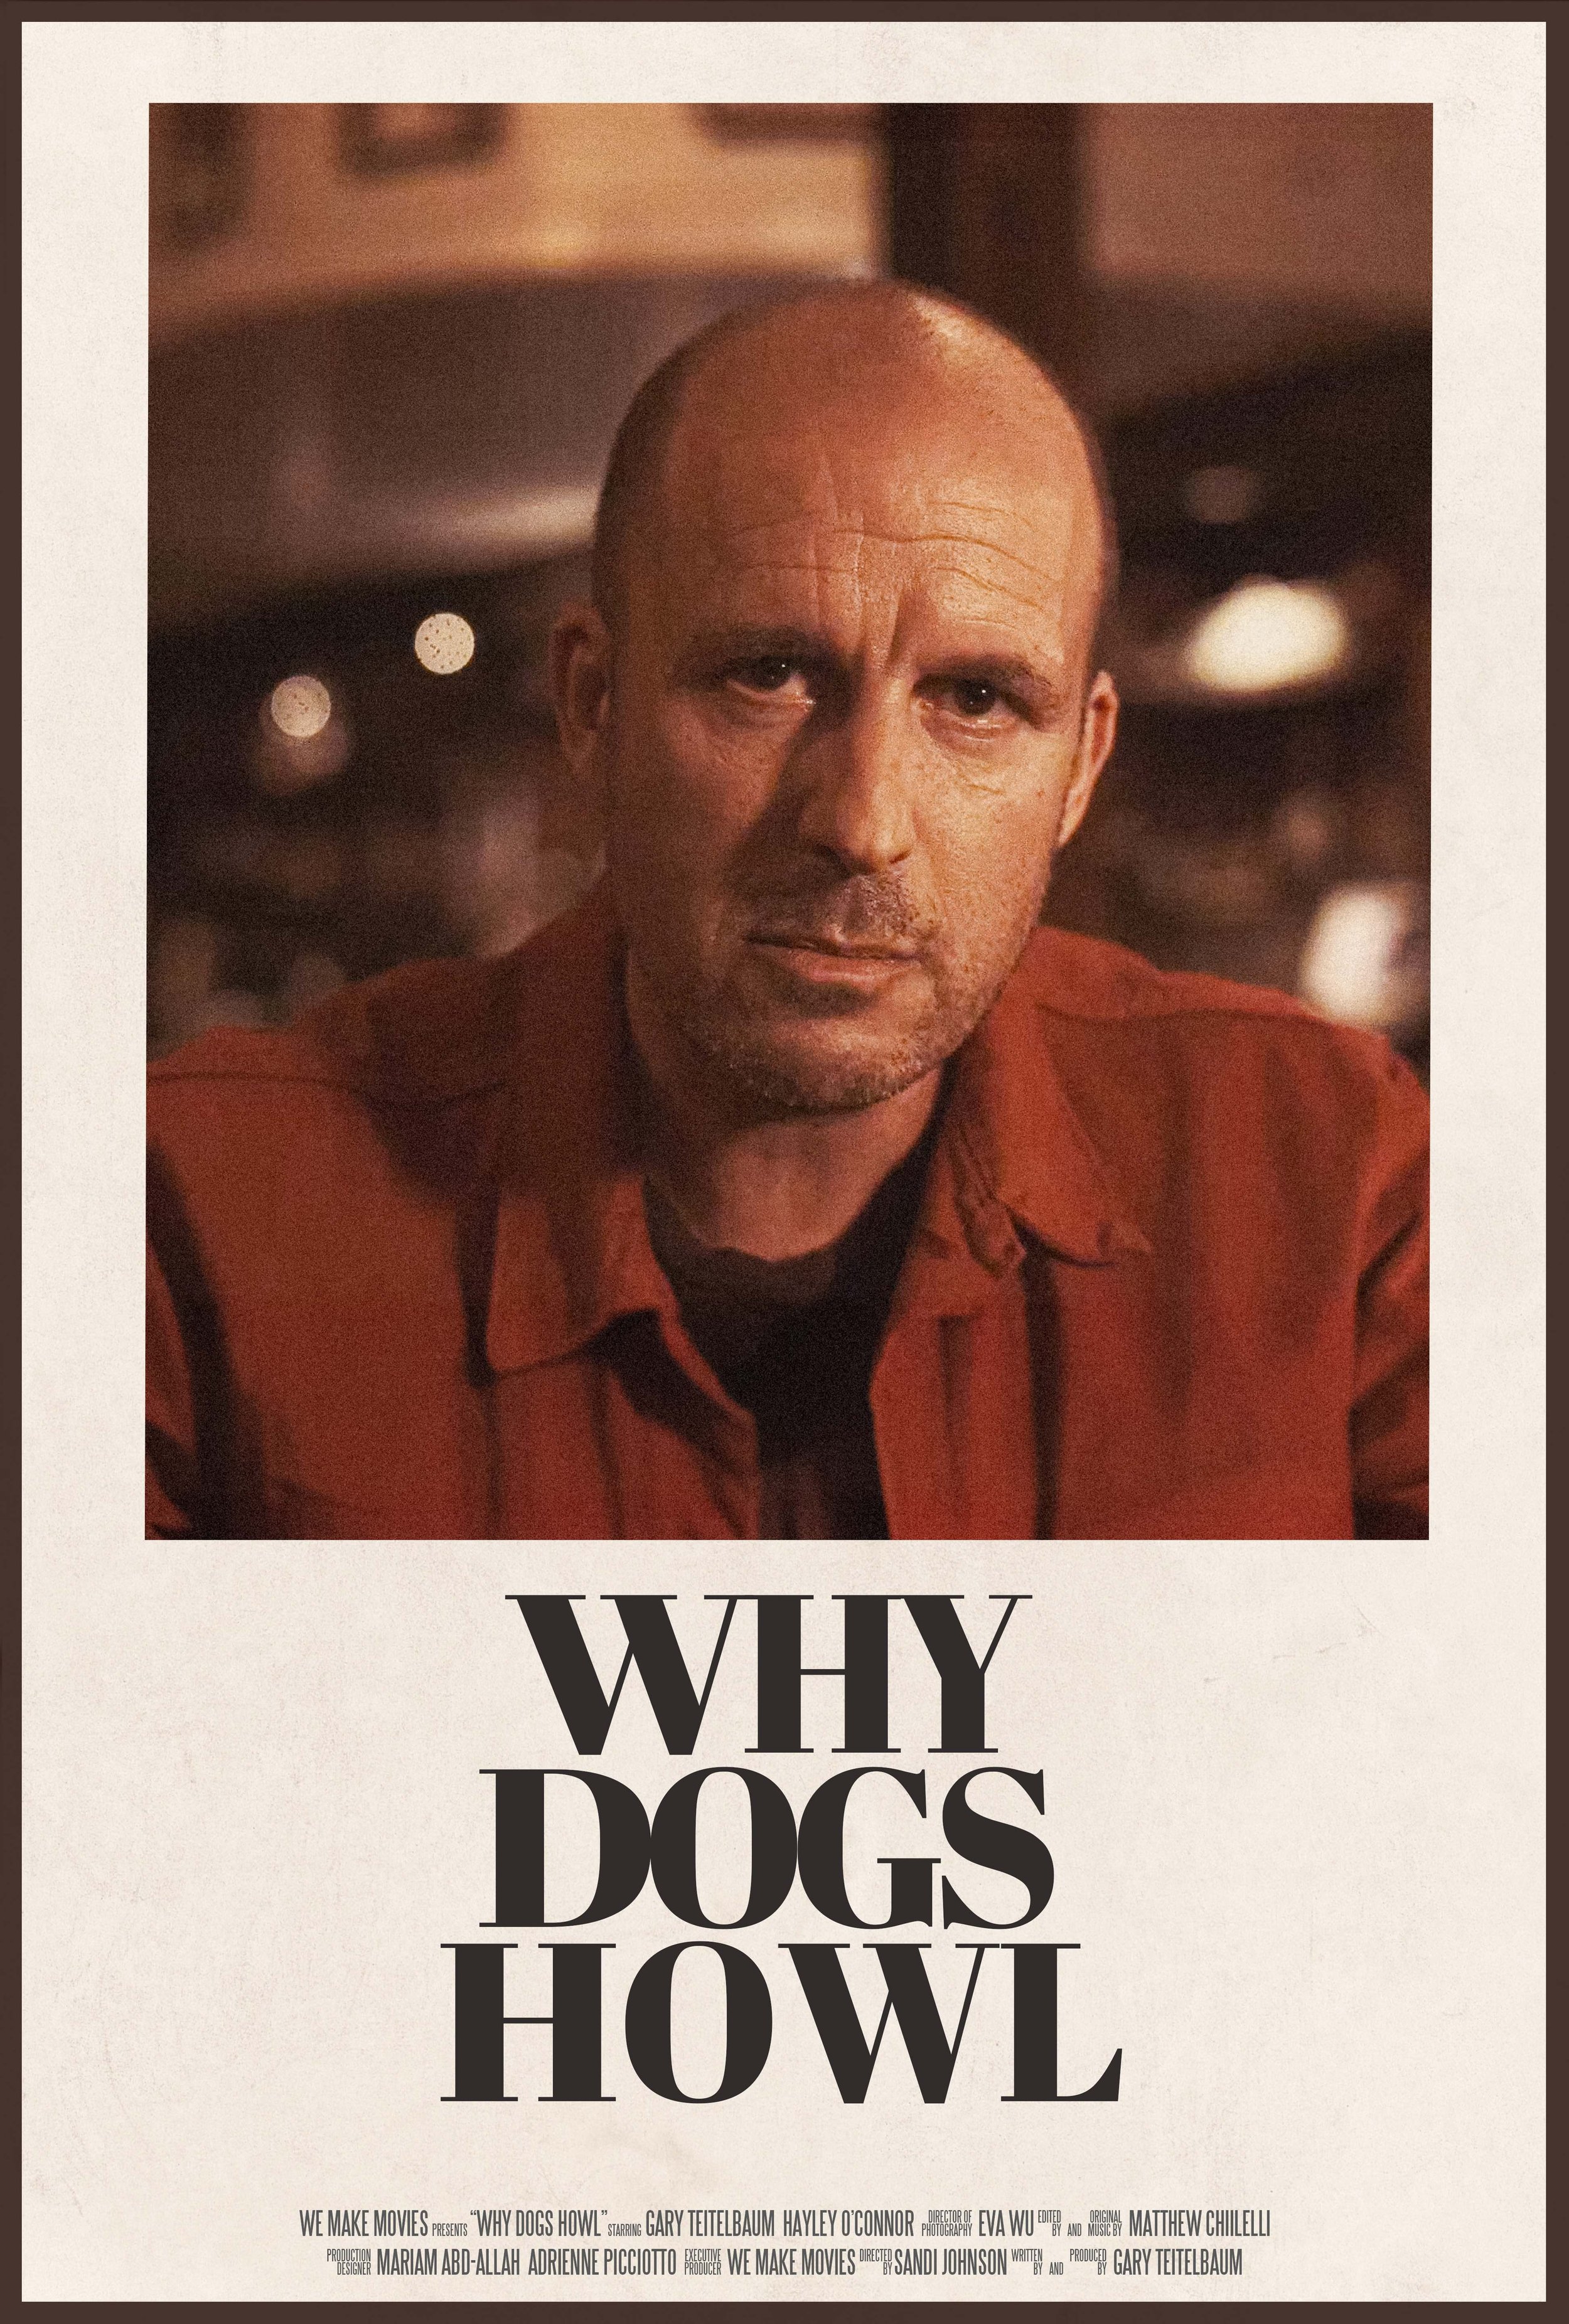 Why Dogs Howl poster by PavelShatu (for web).jpg